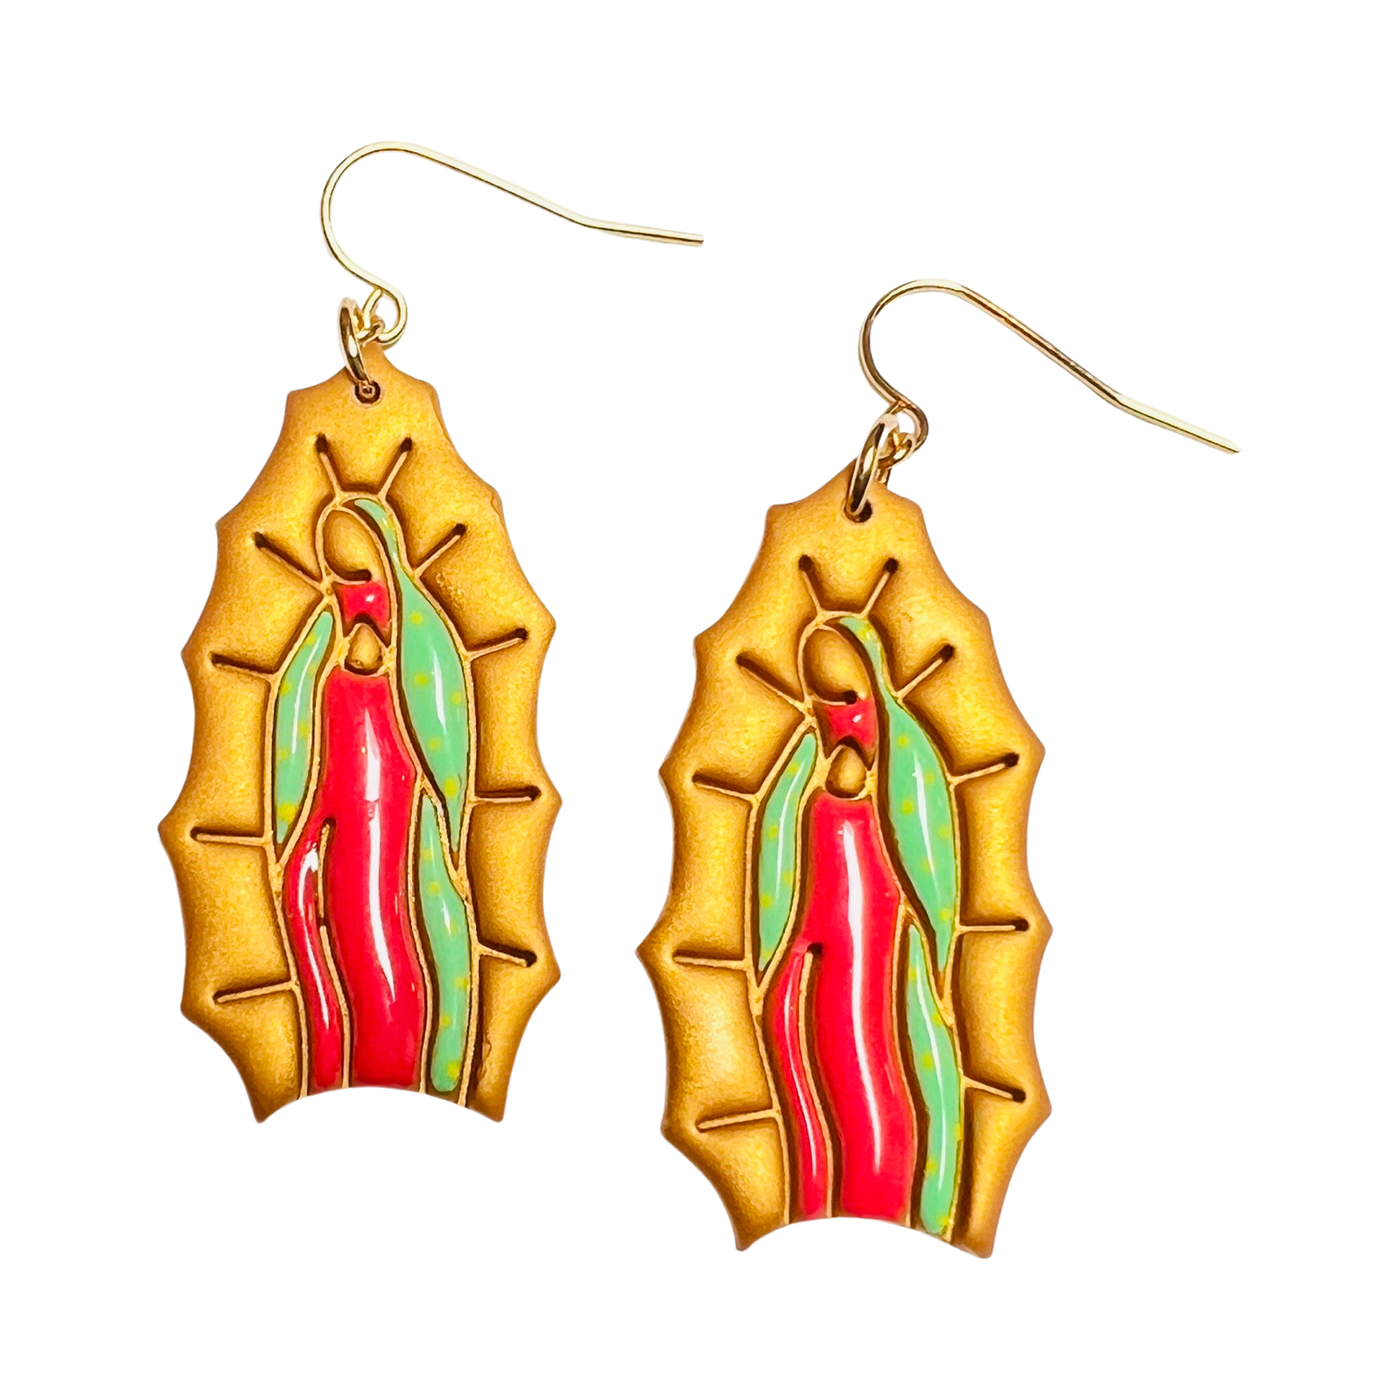 Set of gold Virgen earrings featuring a red dress and green shawl